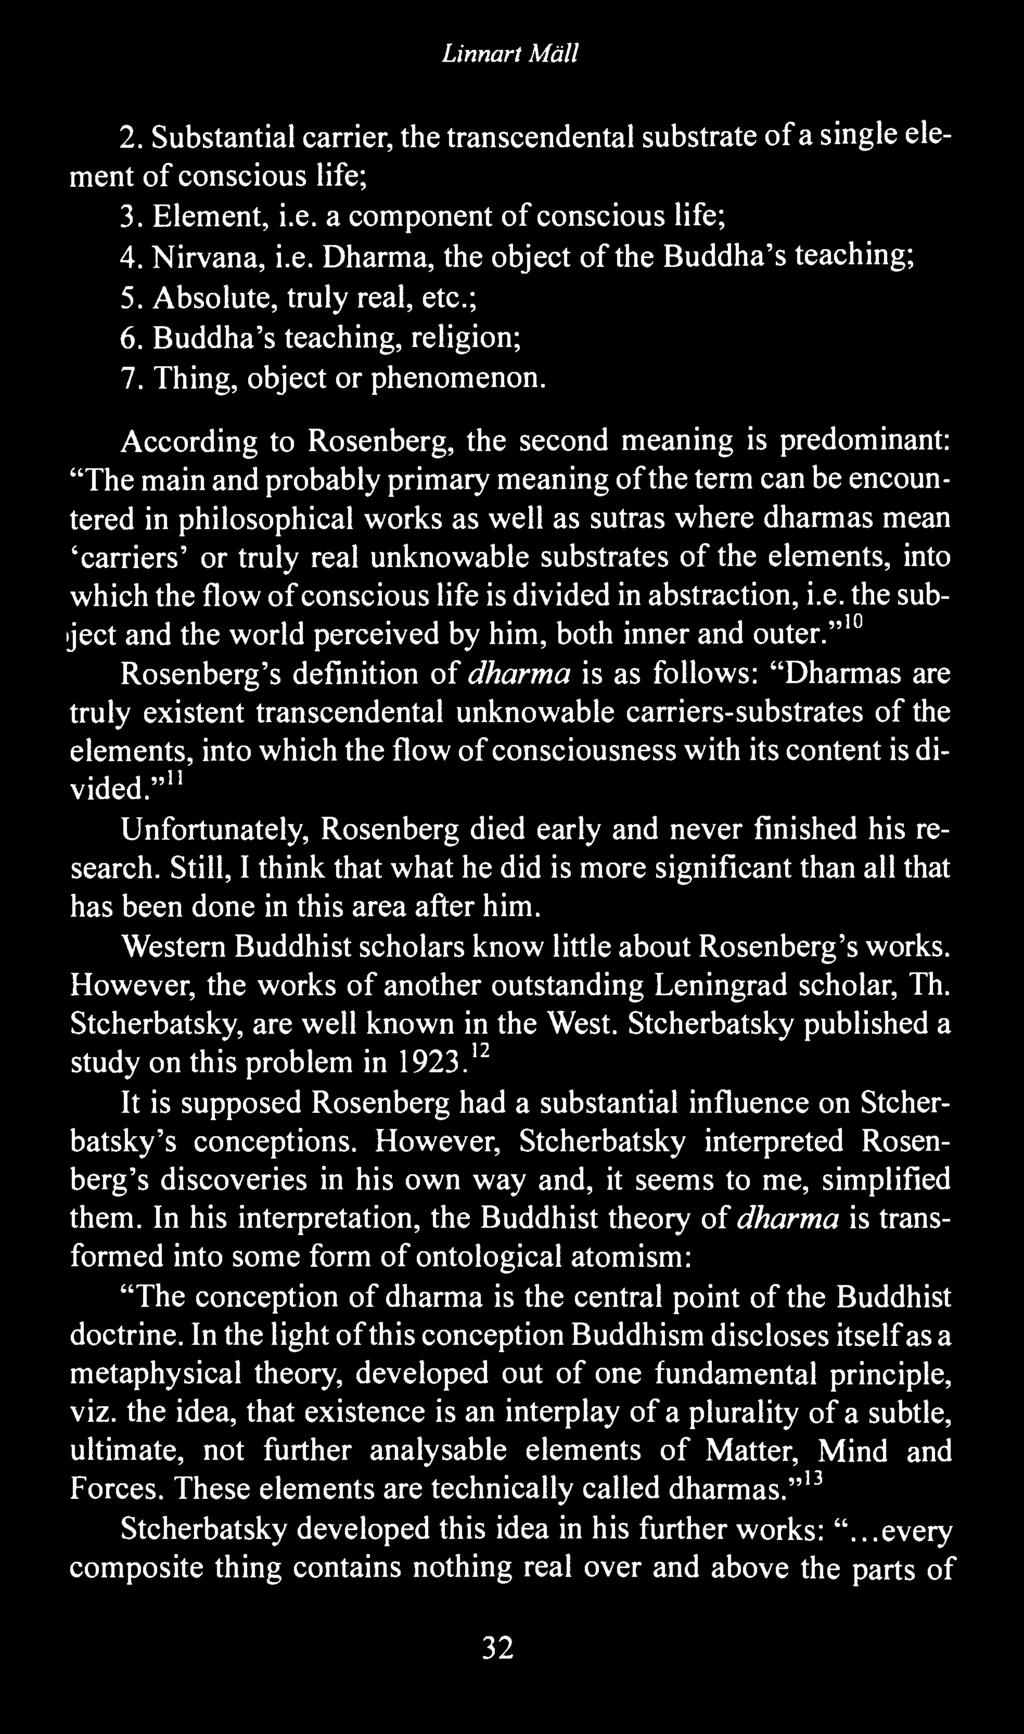 According to Rosenberg, the second meaning is predominant: "The main and probably primary meaning of the term can be encountered in philosophical works as well as sutras where dharmas mean 'carriers'